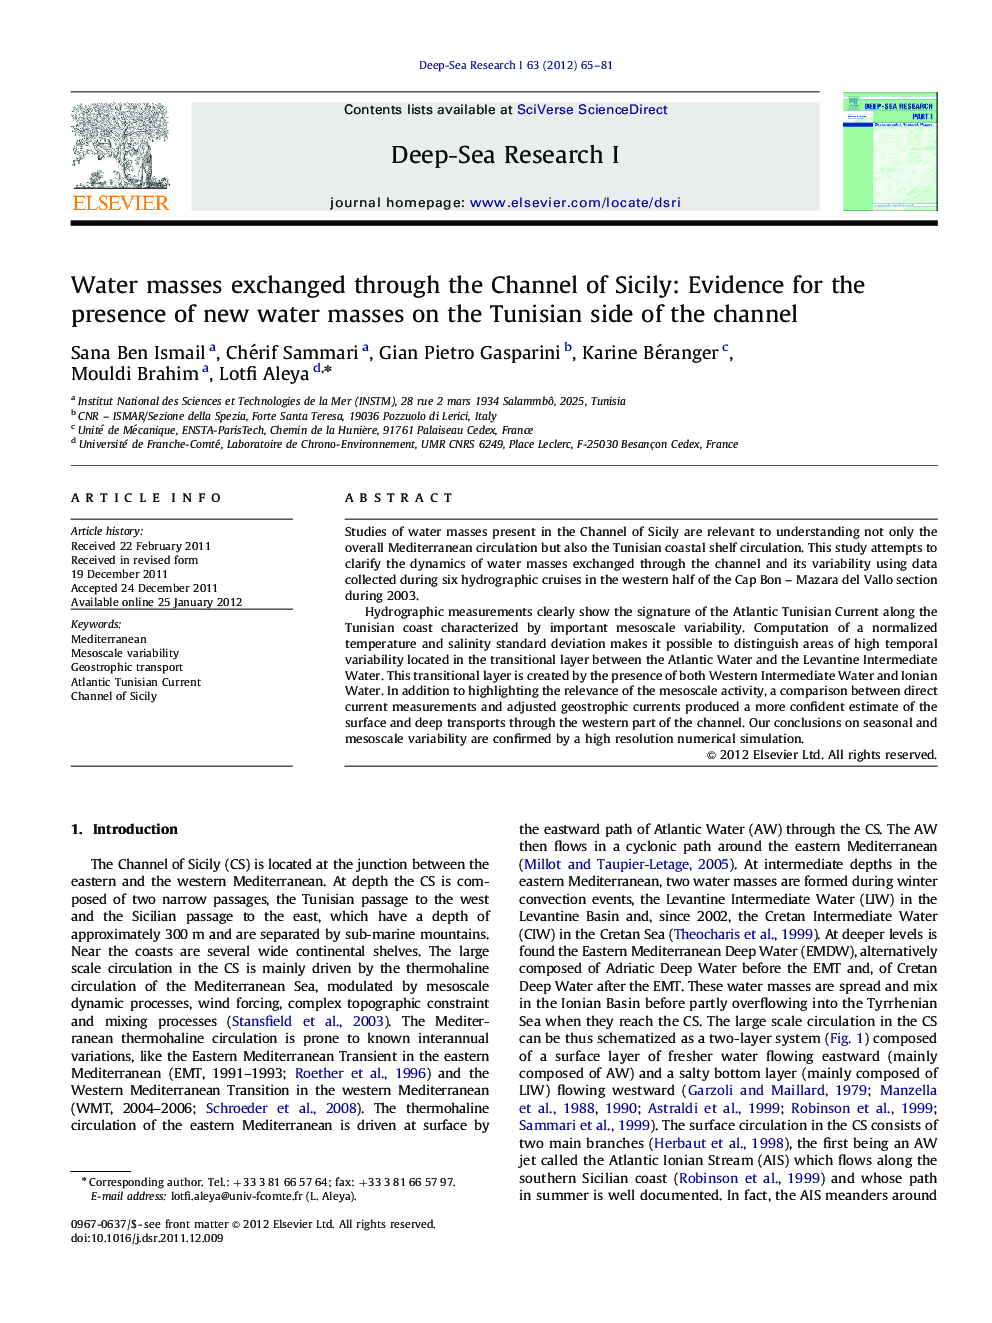 Water masses exchanged through the Channel of Sicily: Evidence for the presence of new water masses on the Tunisian side of the channel